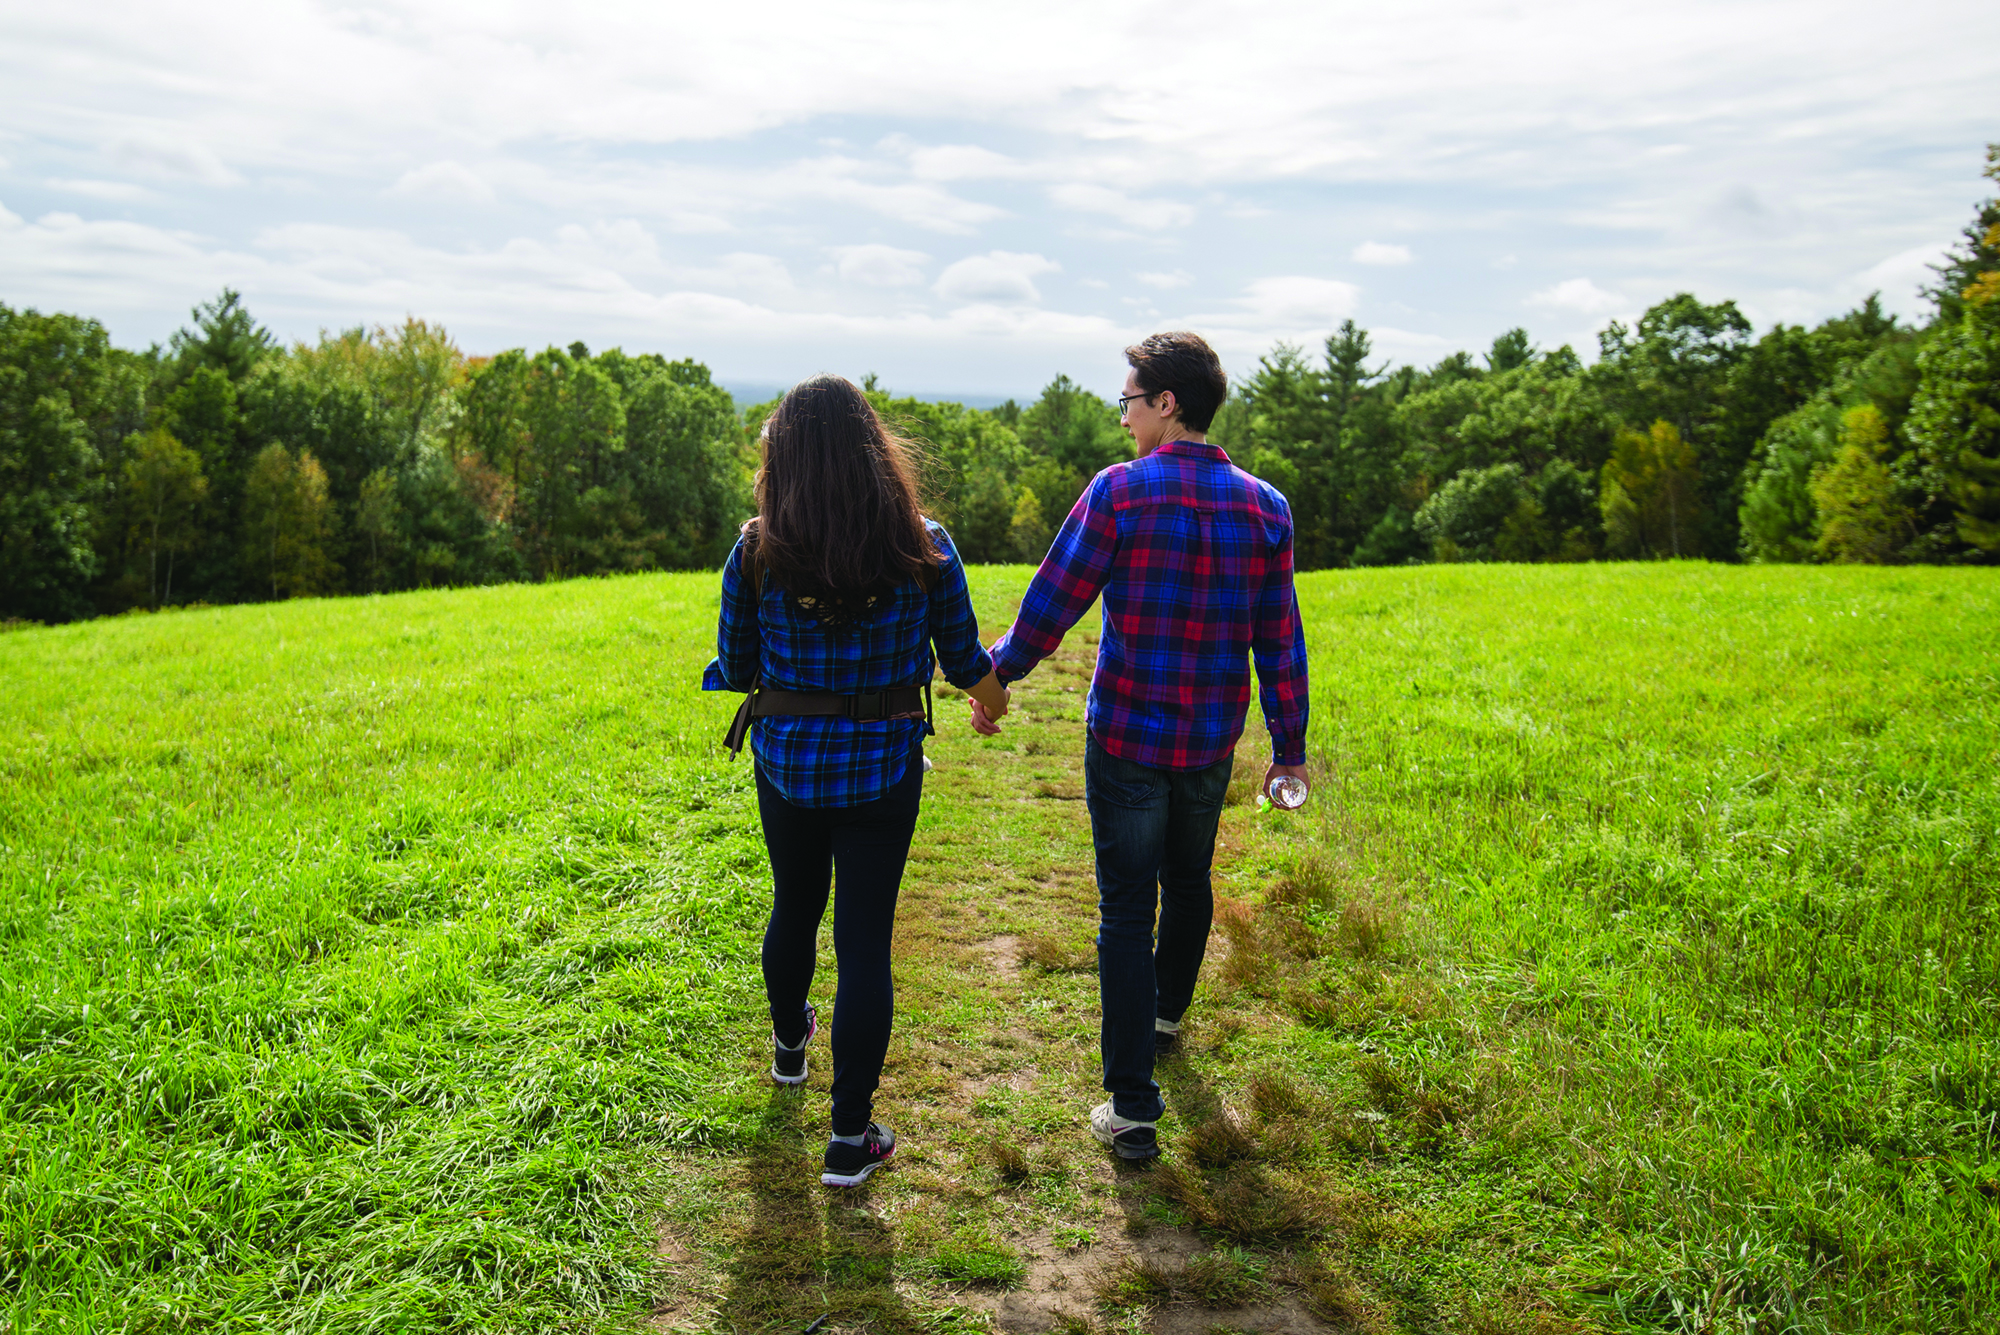 Two people viewed from the back walking hand in hand down a path in the middle of a sunny field